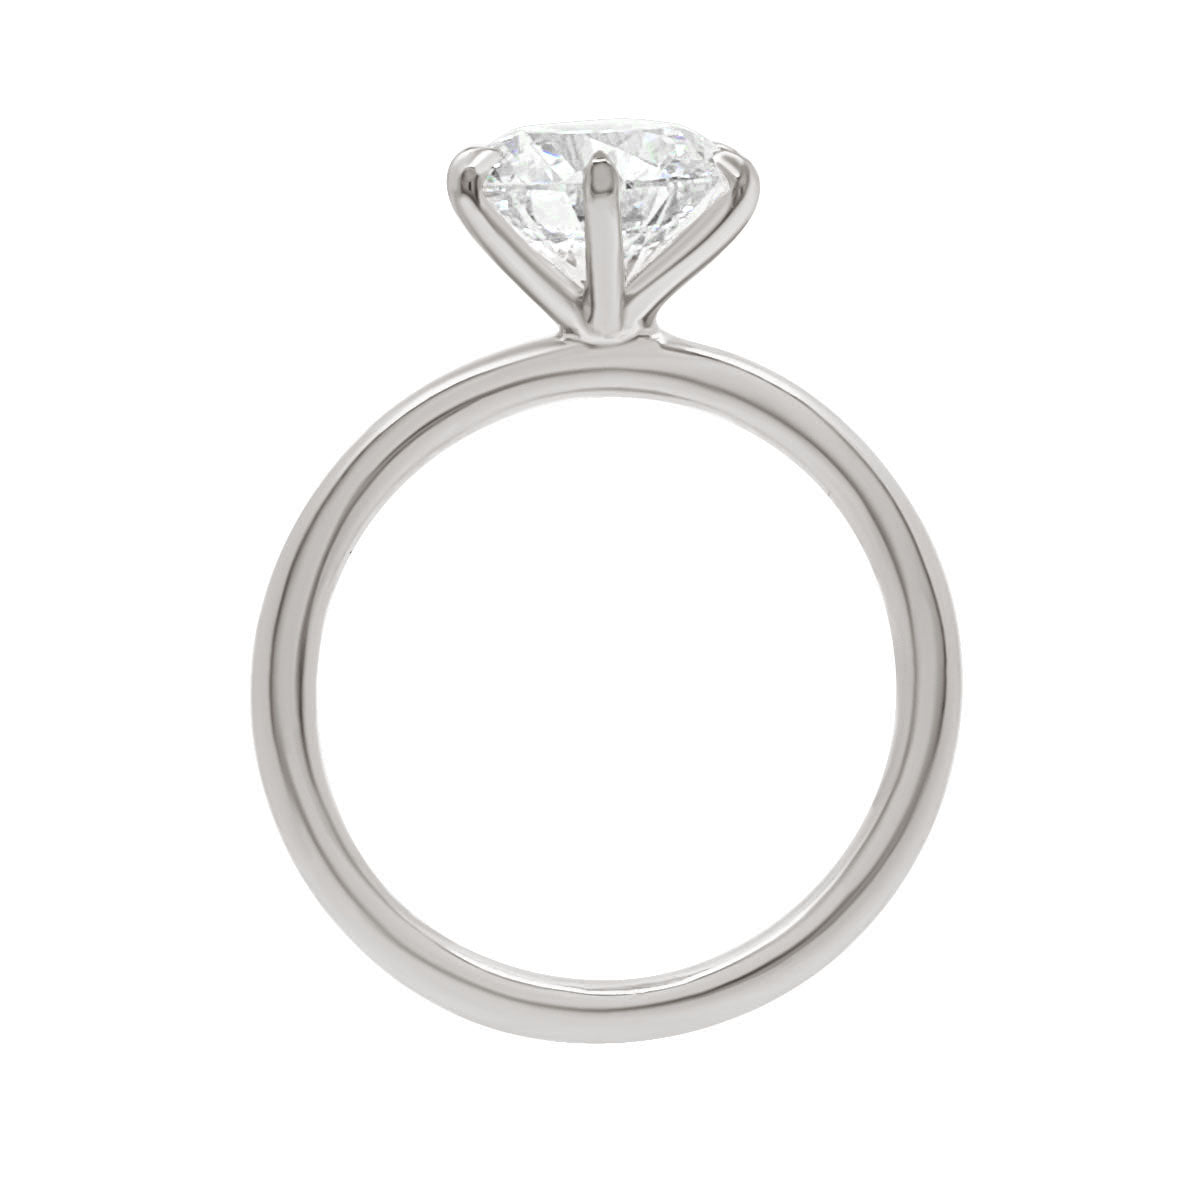 Talon Claw Solitaire ring in white gold standing upright